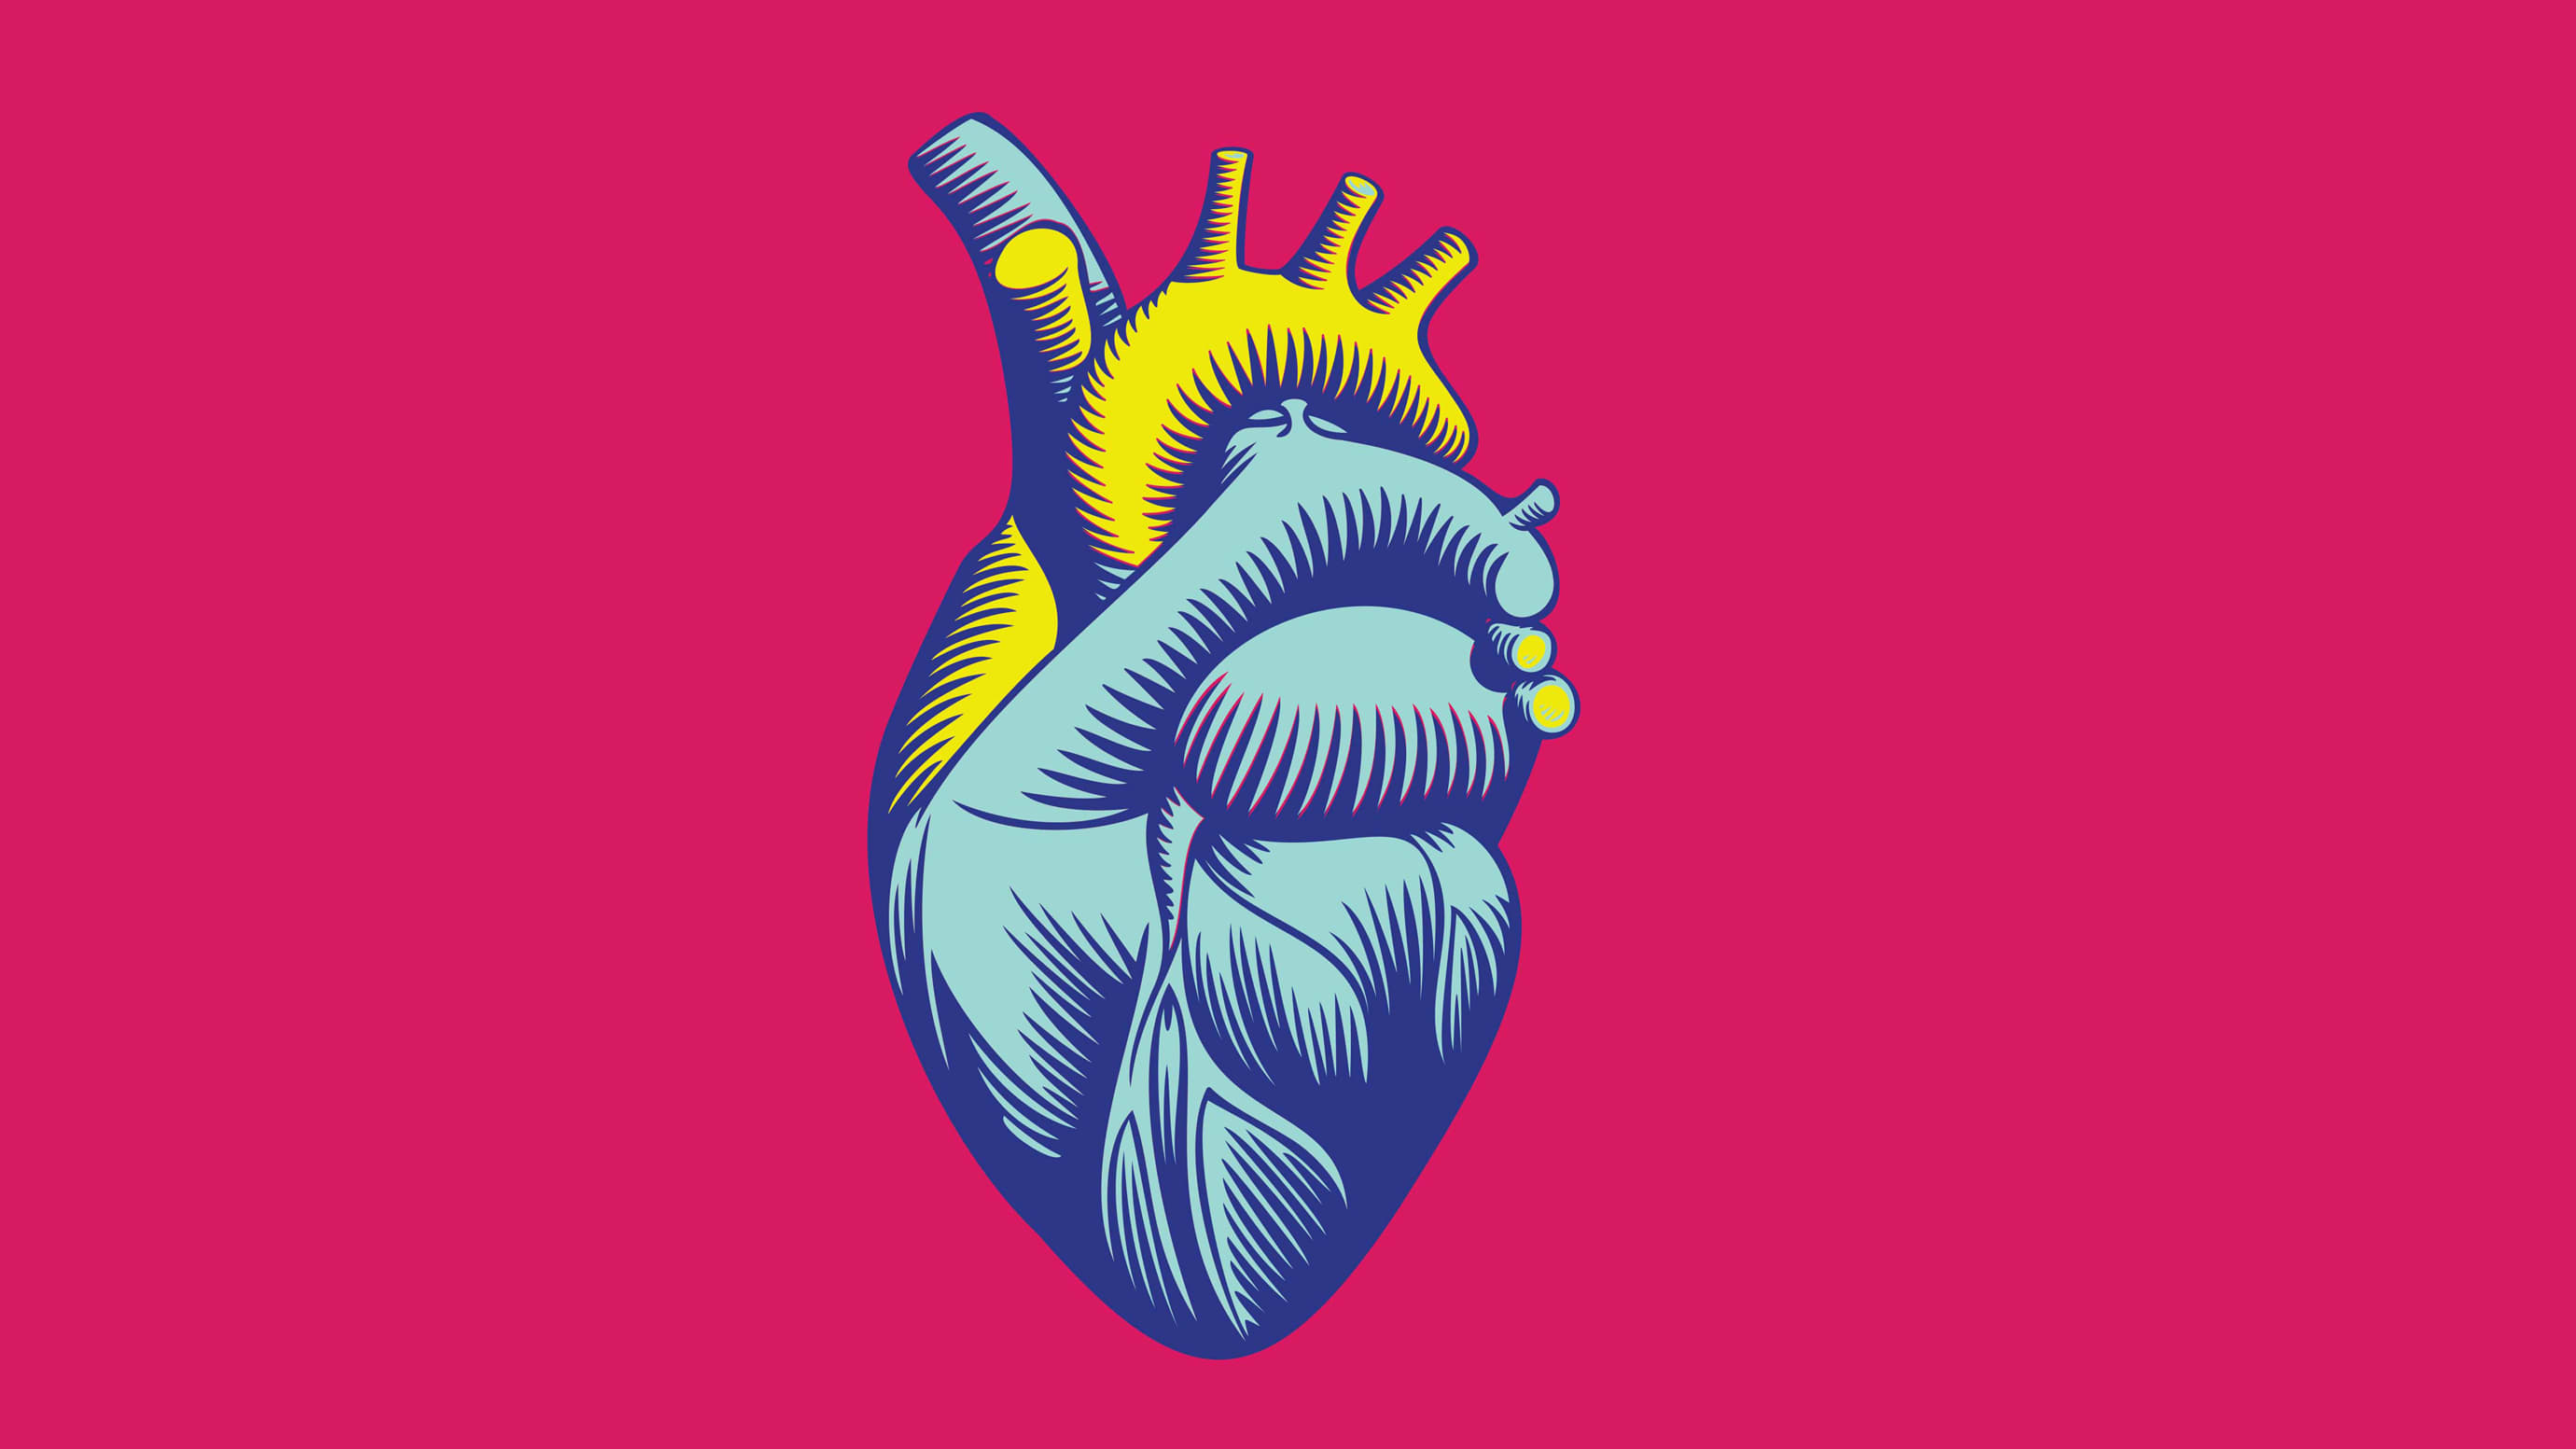 Anatomical blue and yellow heart illustration on hot pink background